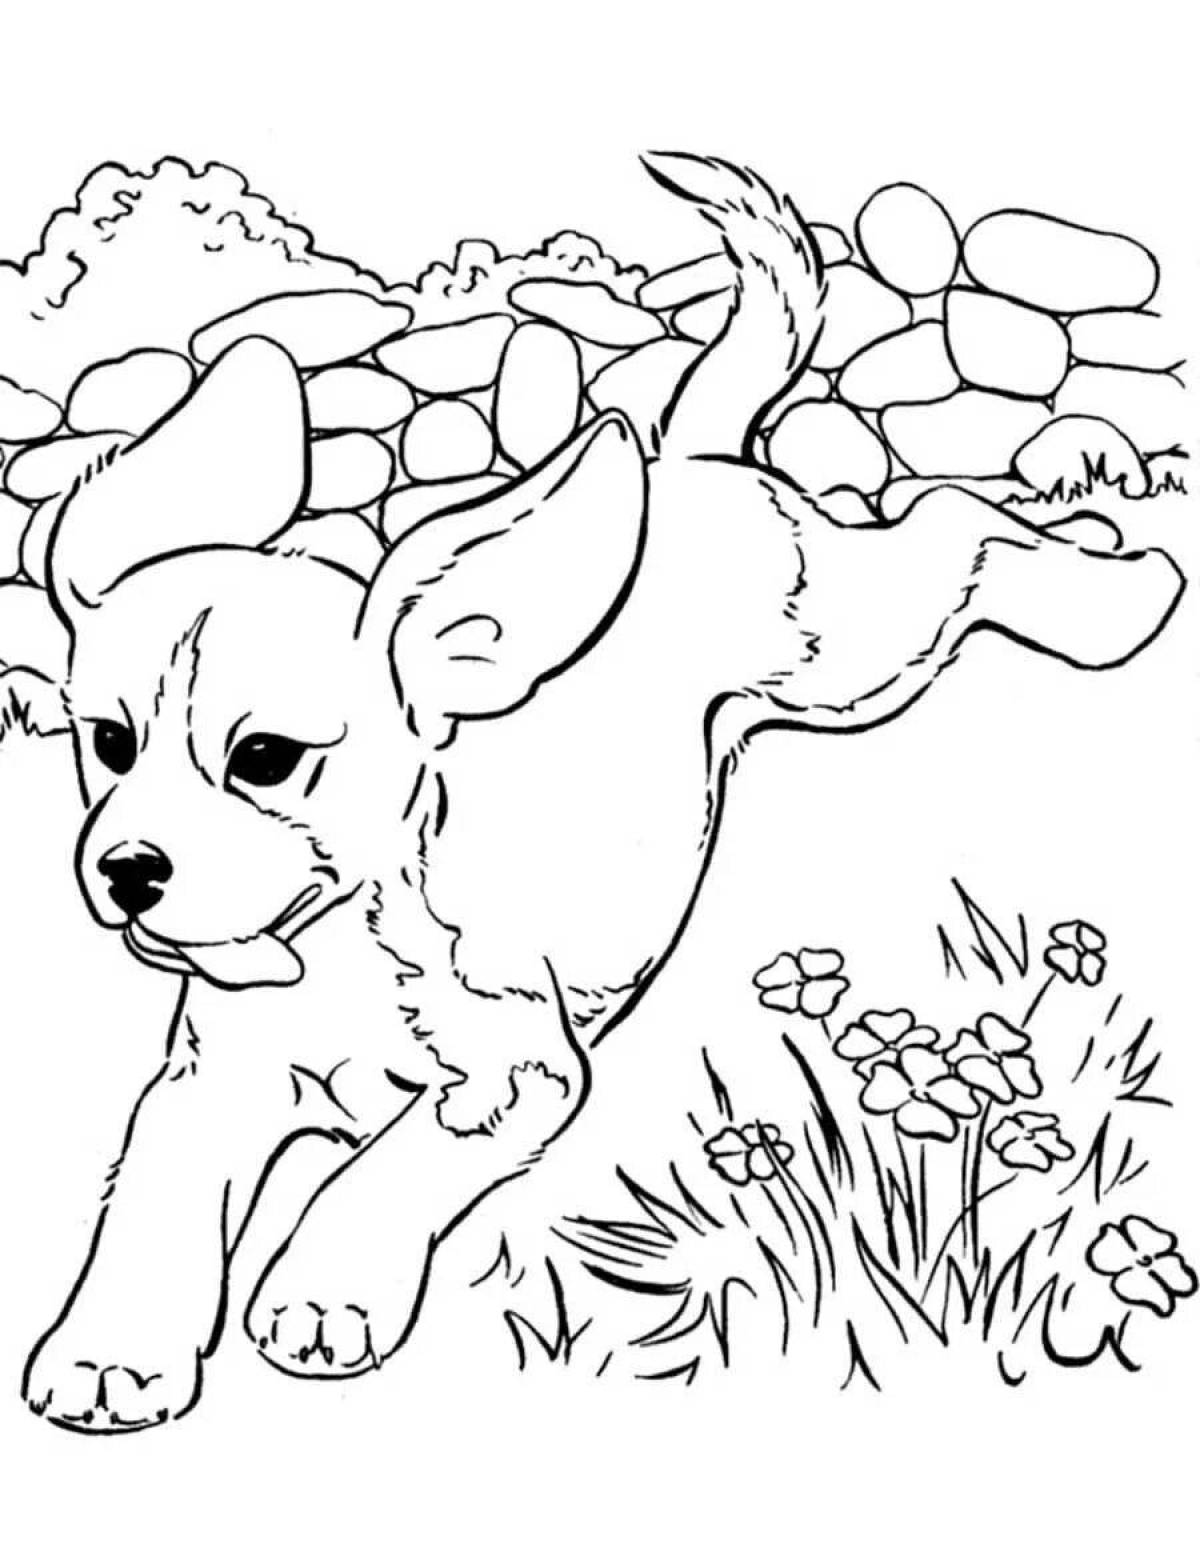 A fascinating dog coloring book for children 6-7 years old